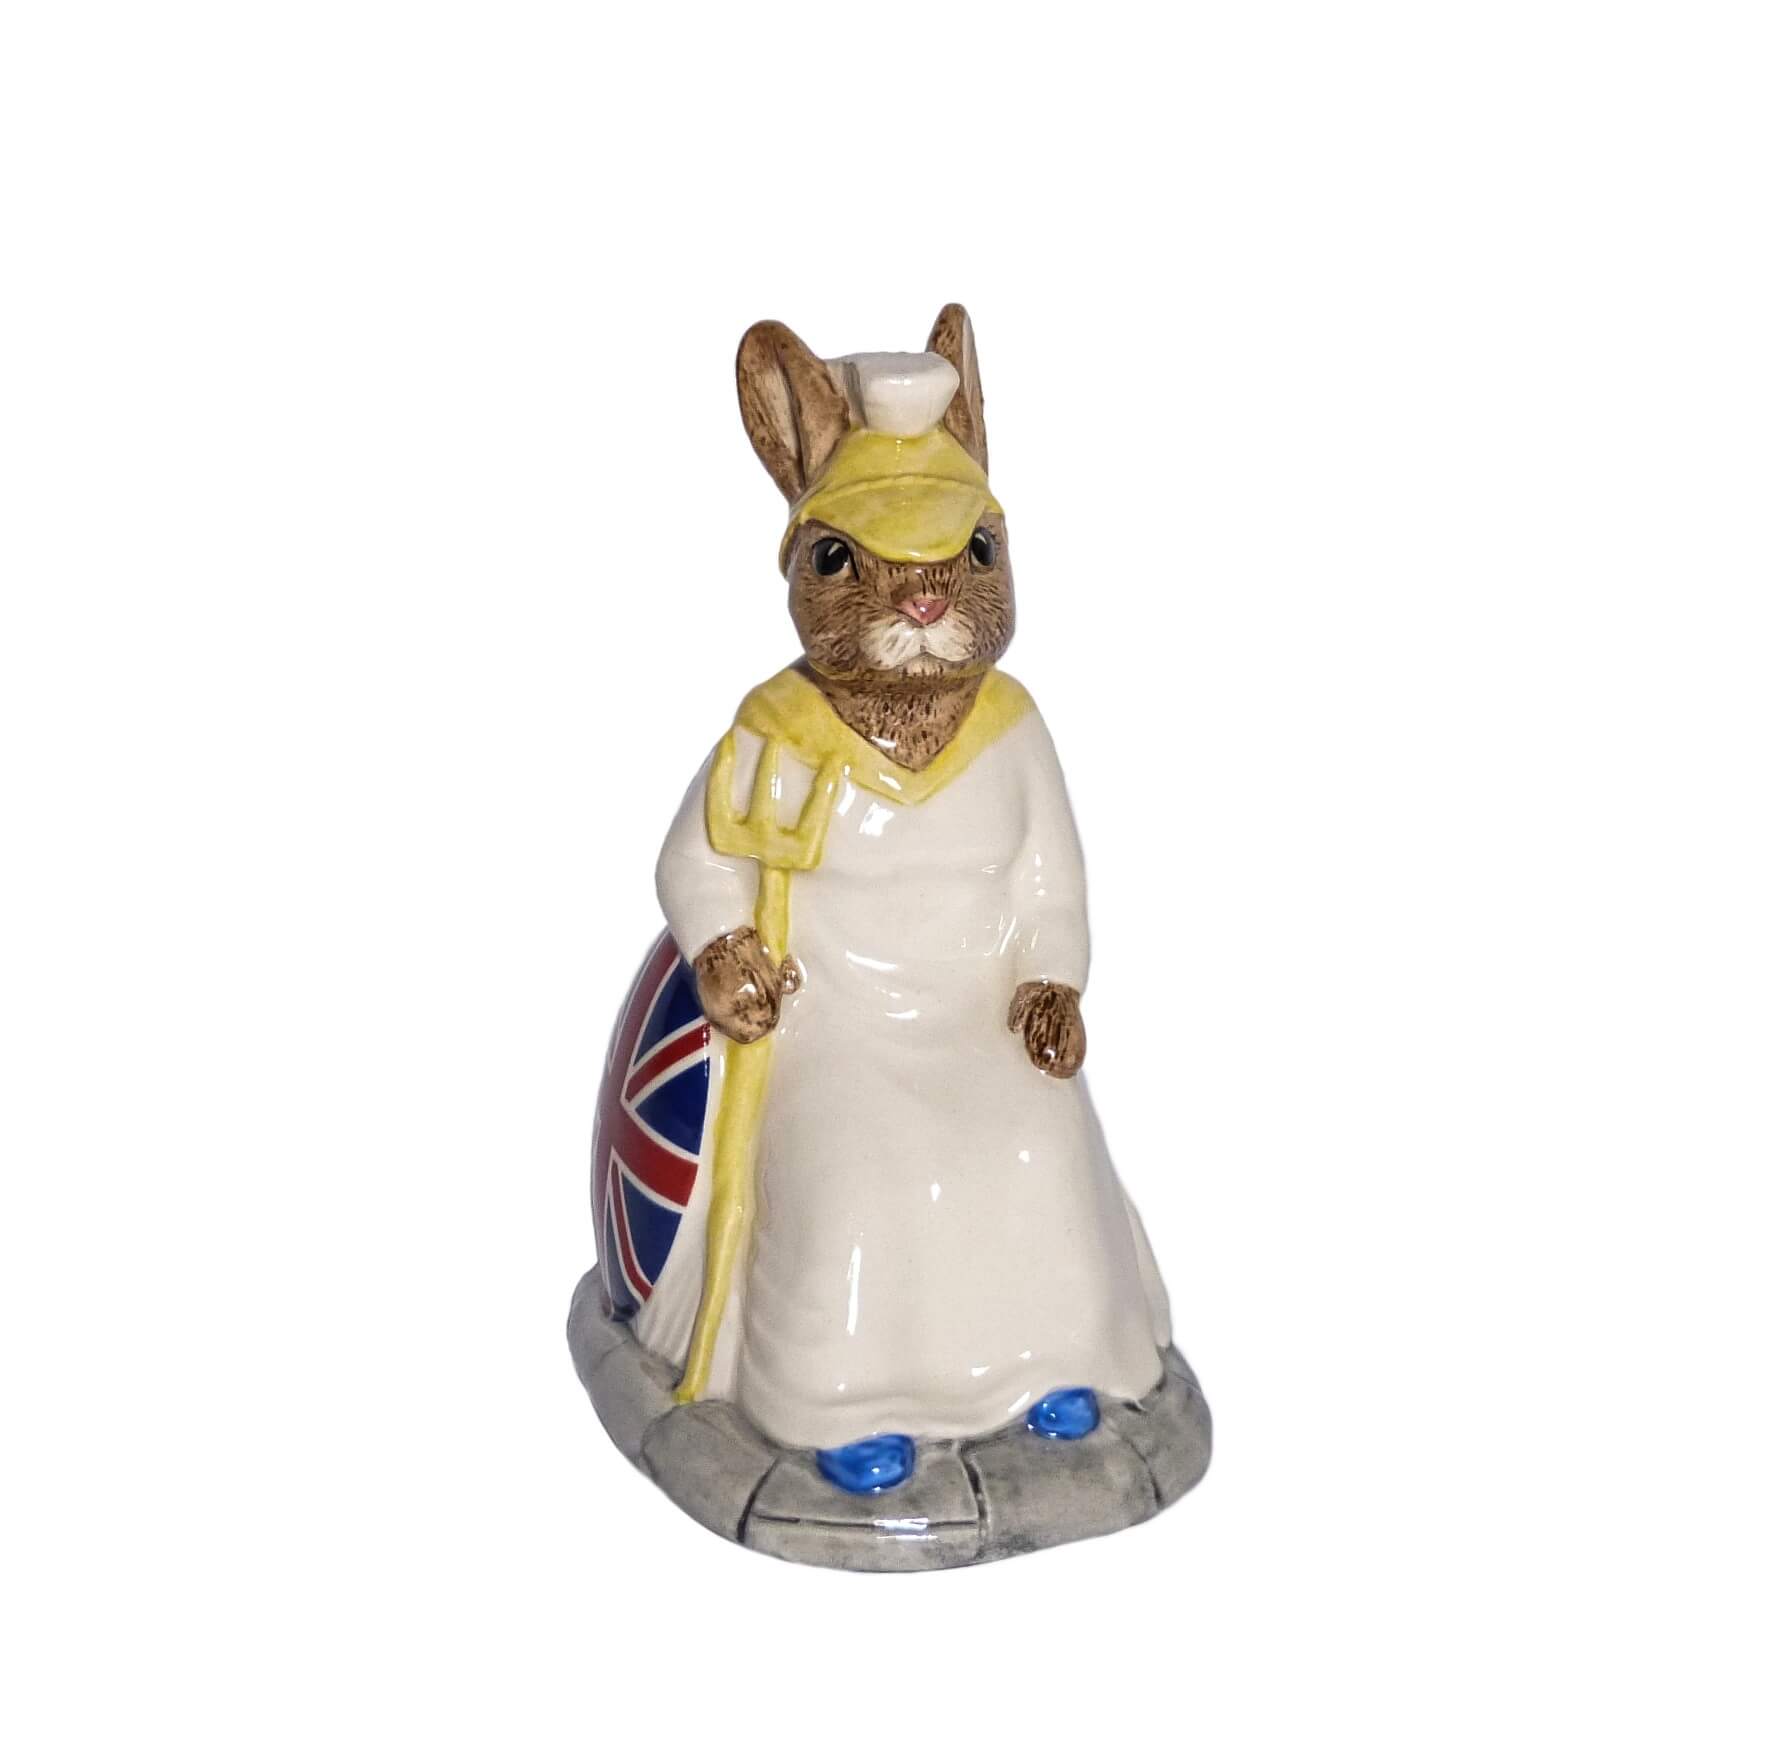 The figure is wearing a white gown and a helmet. She is holding a trident and has a shield painted with a red ,white and blue Union Jack.